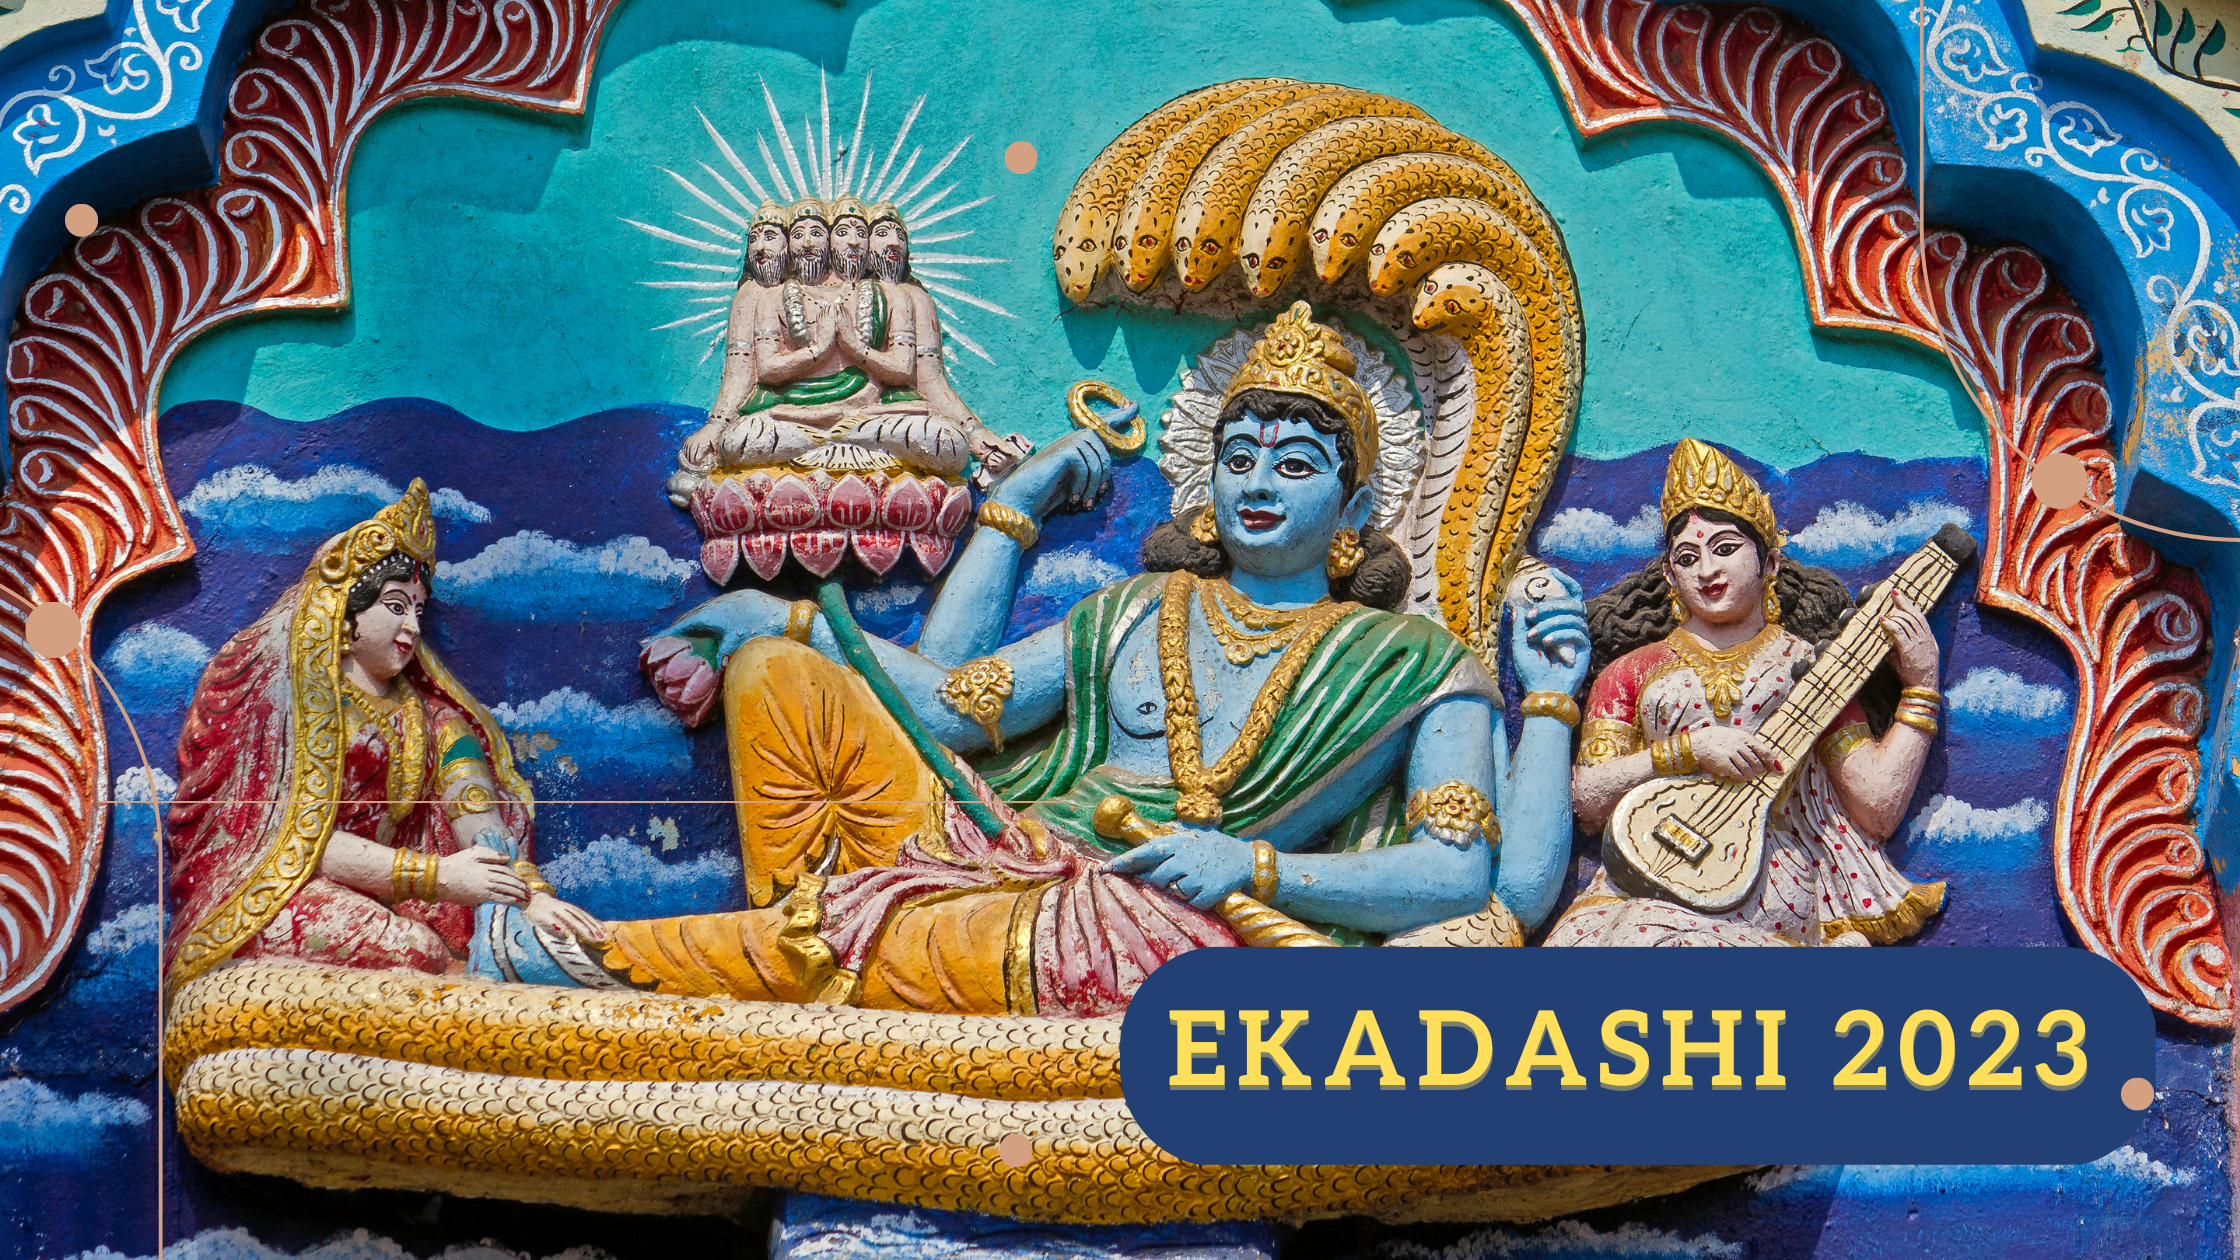 Don't forget to observe the first Pausha Putrada Ekadashi of 2023 today